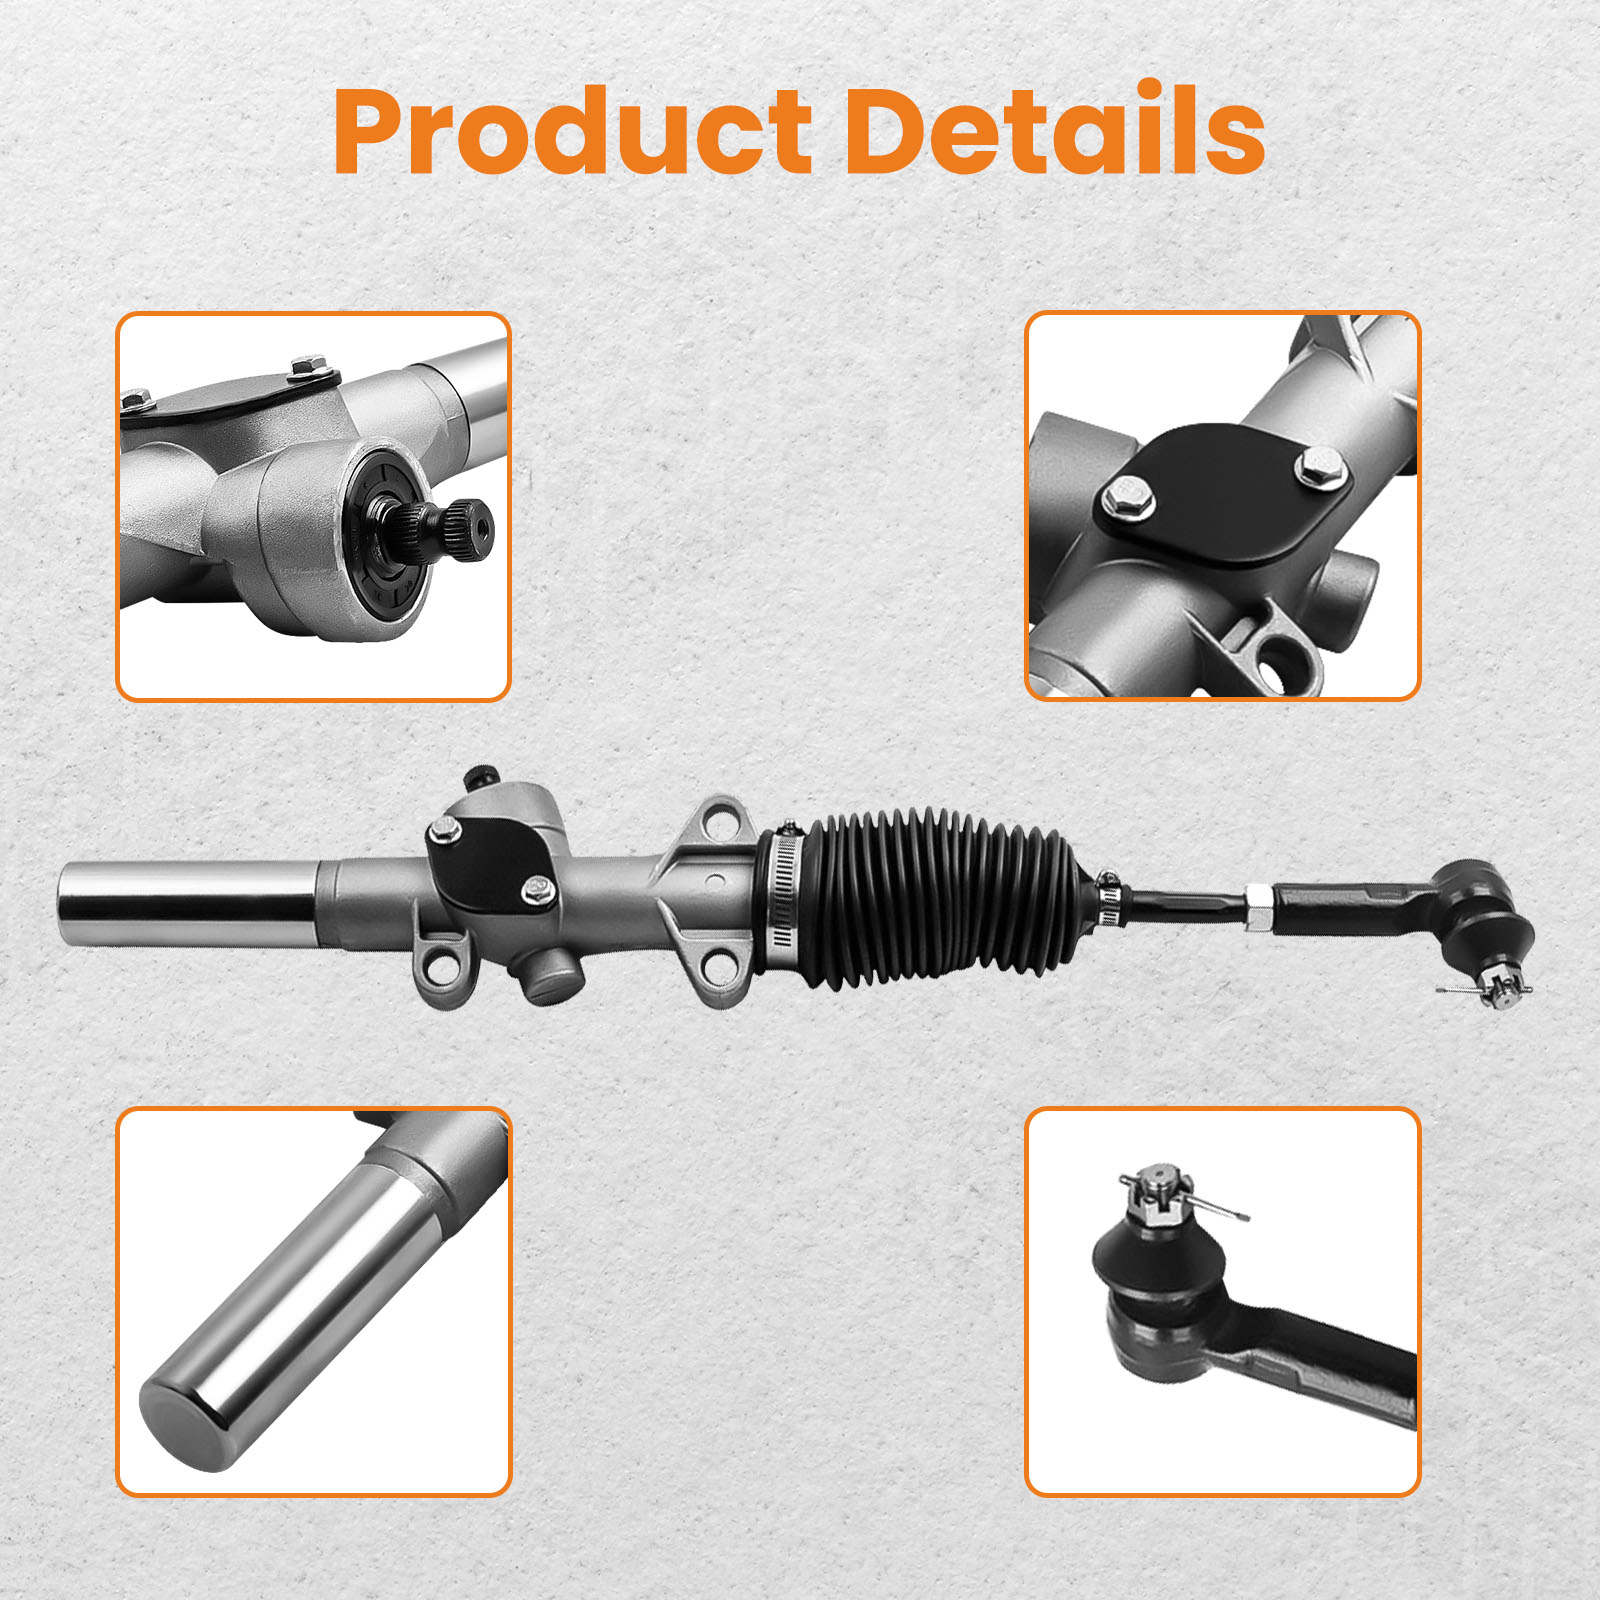 Rack and pinion, Steering, Automotive, Gears